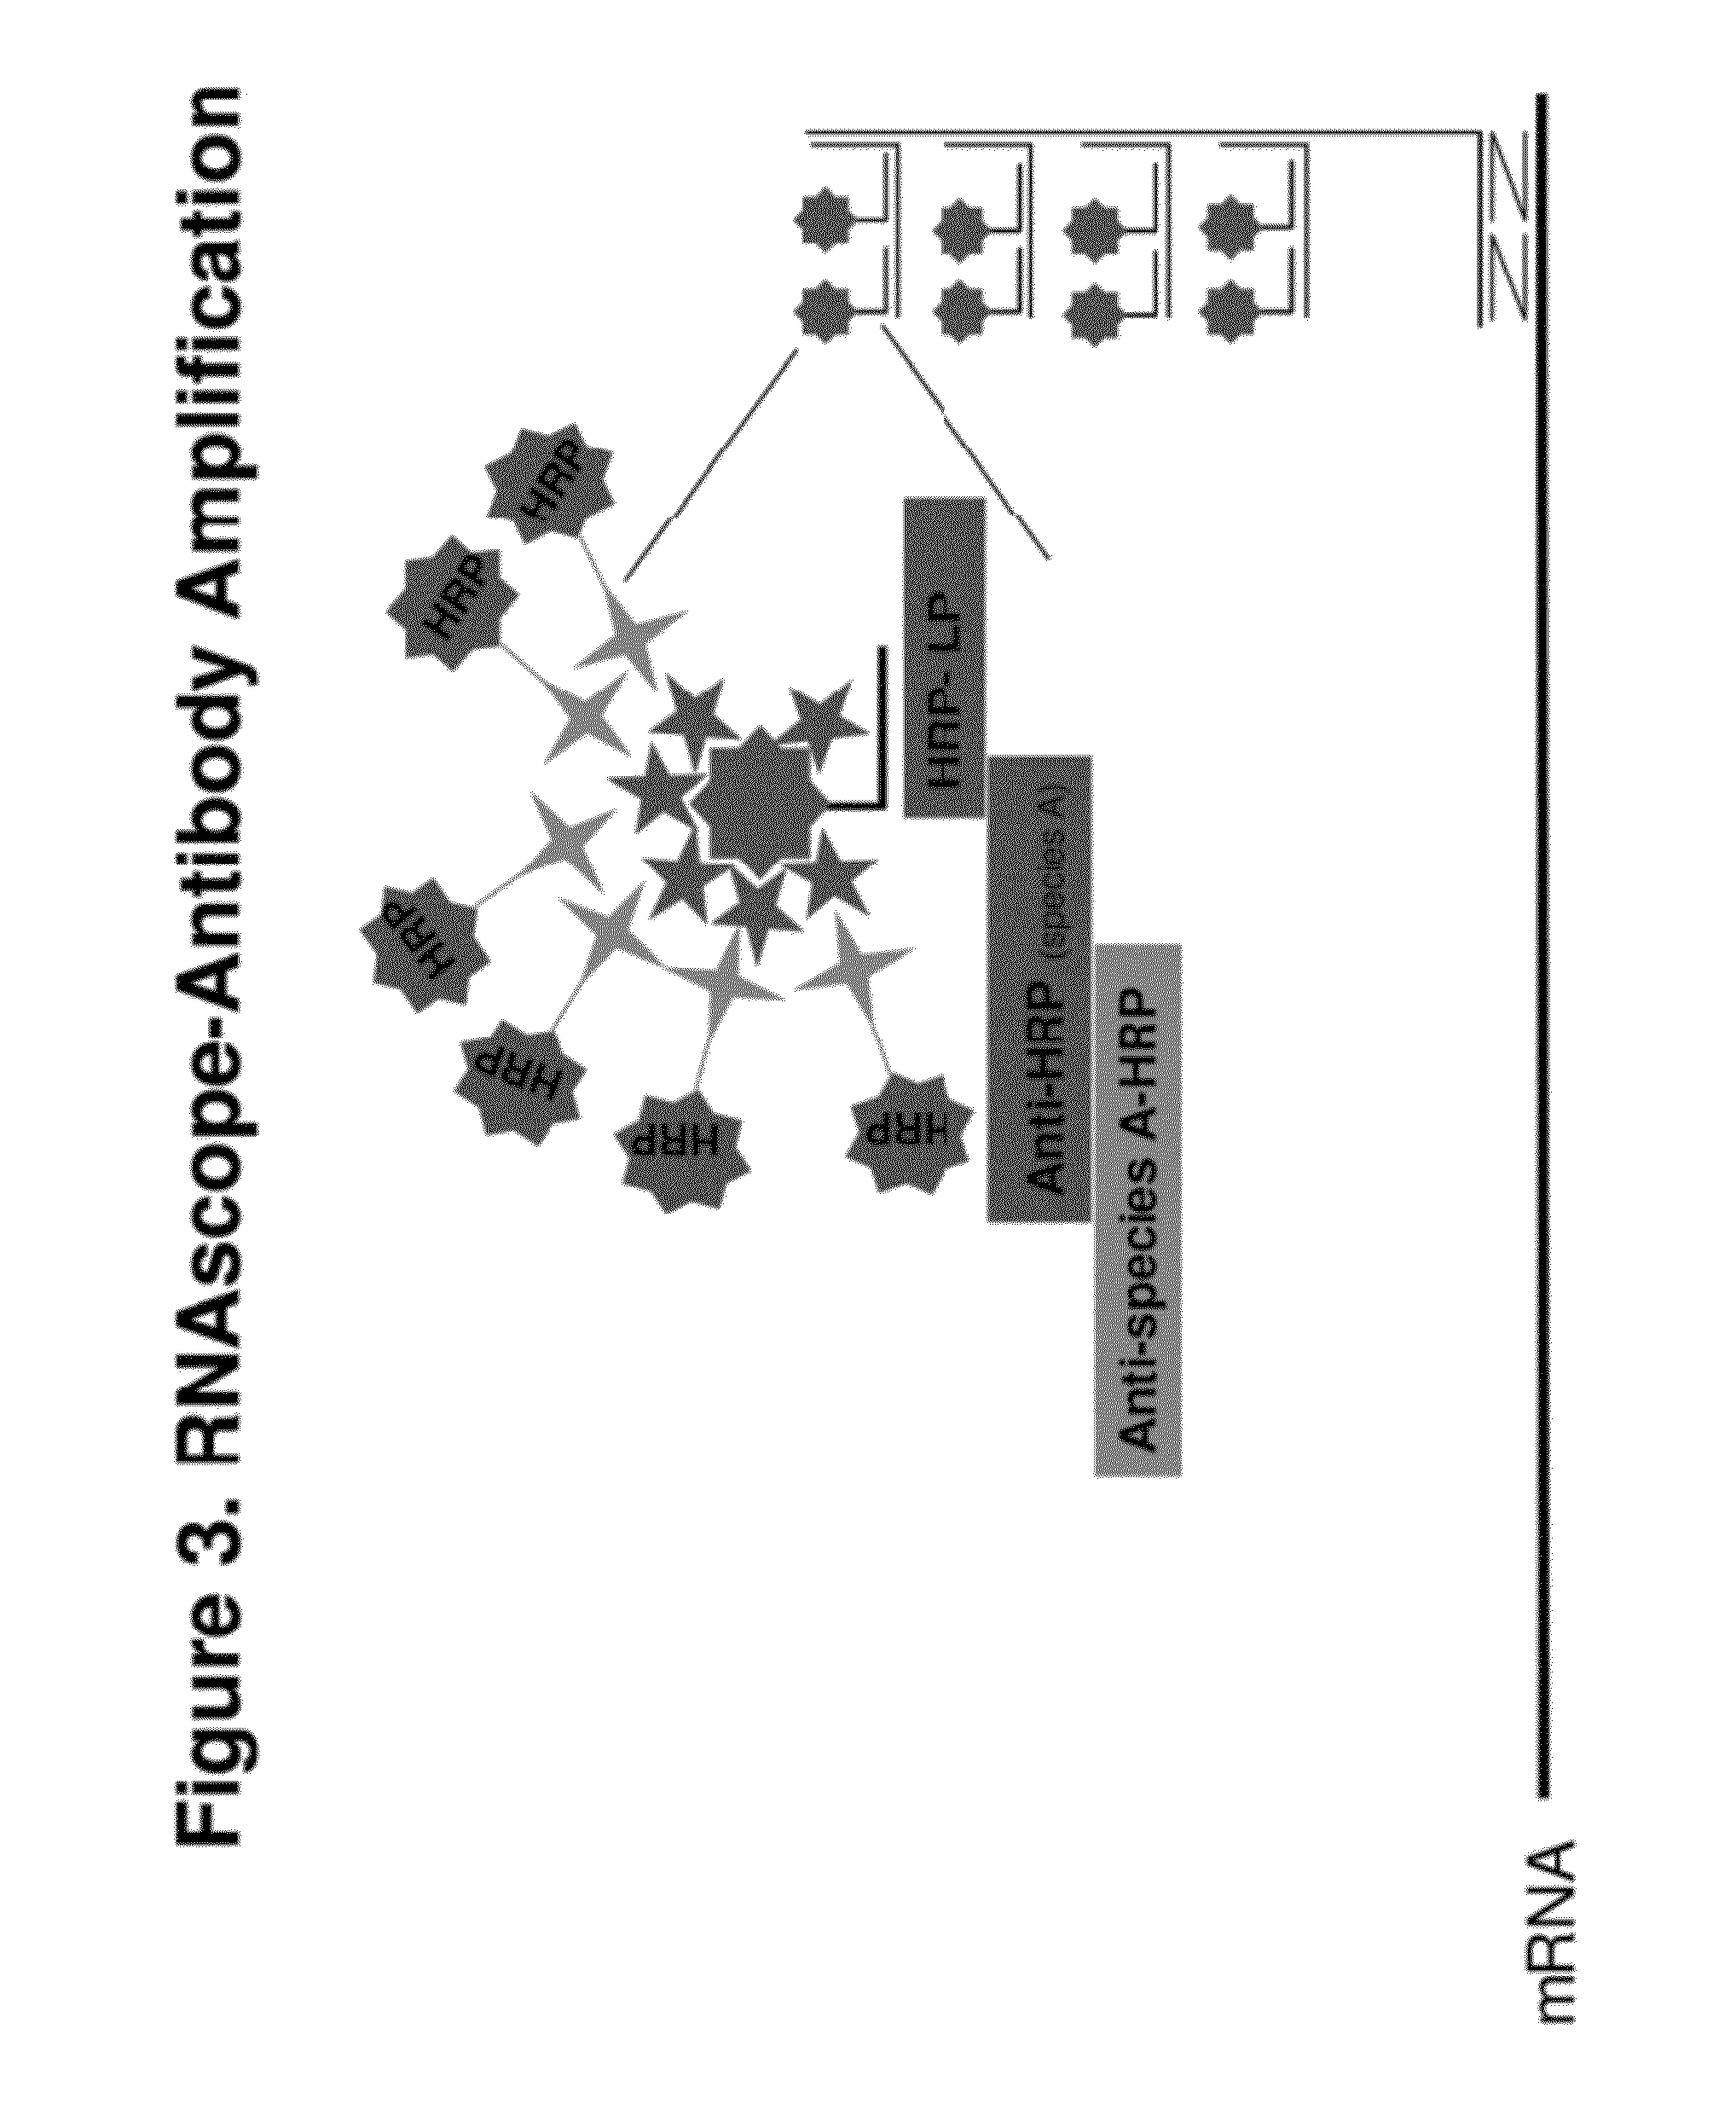 Ultra sensitive method for in situ detection of nucleic acids